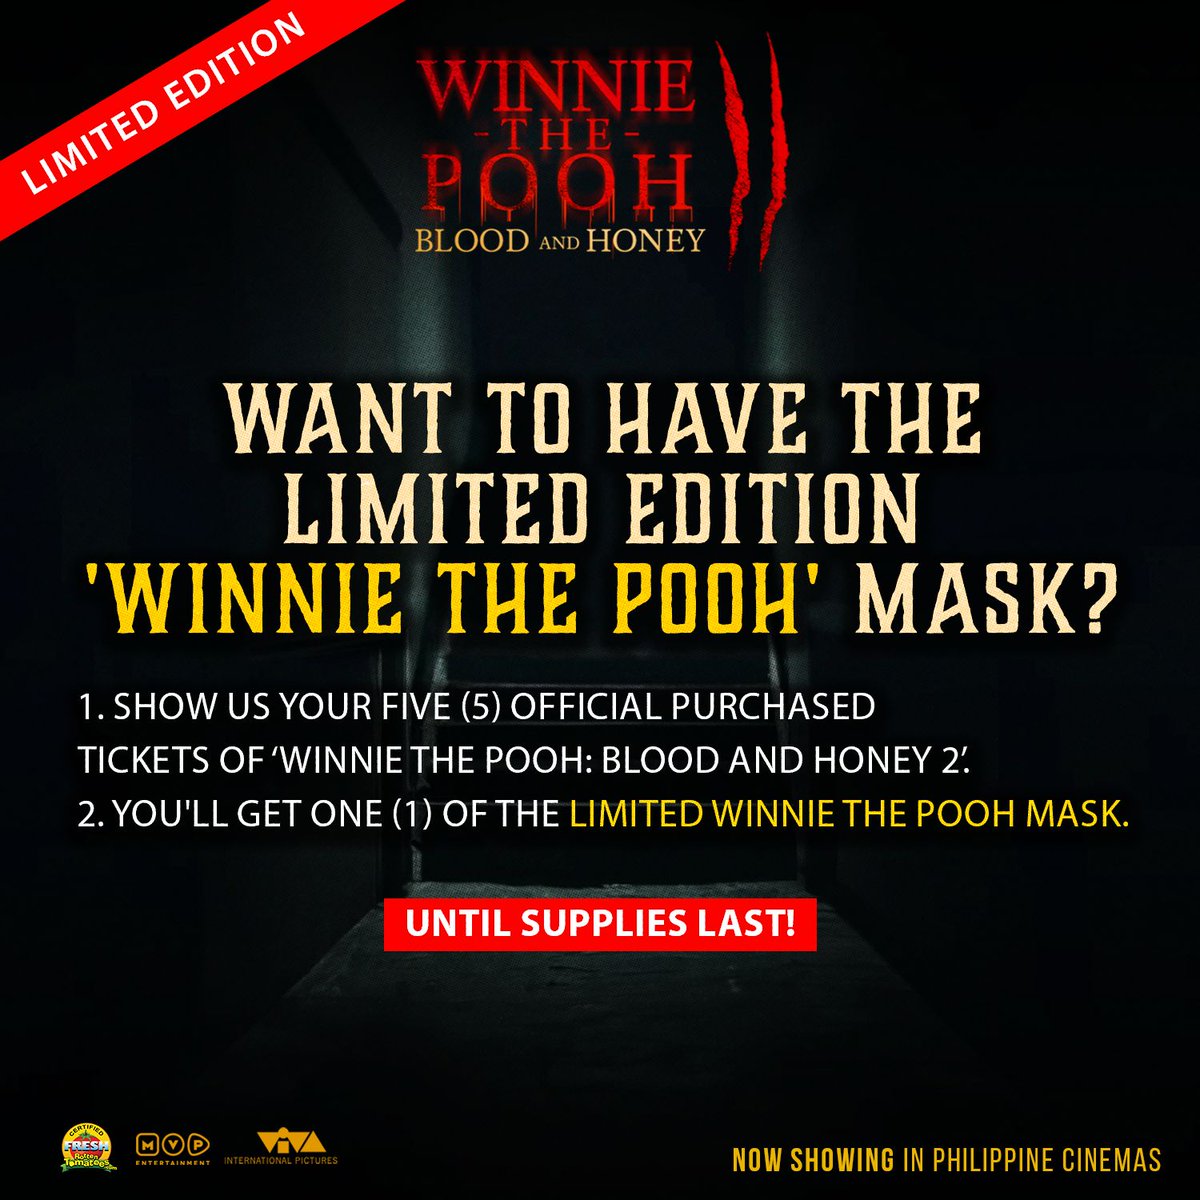 Winnie The Pooh 2 Mask Merch Mechanics: 1. Show us your FIVE Official Purchased tickets of ‘the film. 2. Get the chance to win a limited edition mask. 3. To claim, kindly message us on Viva International Pictures Facebook Page. This is valid until supplies last!